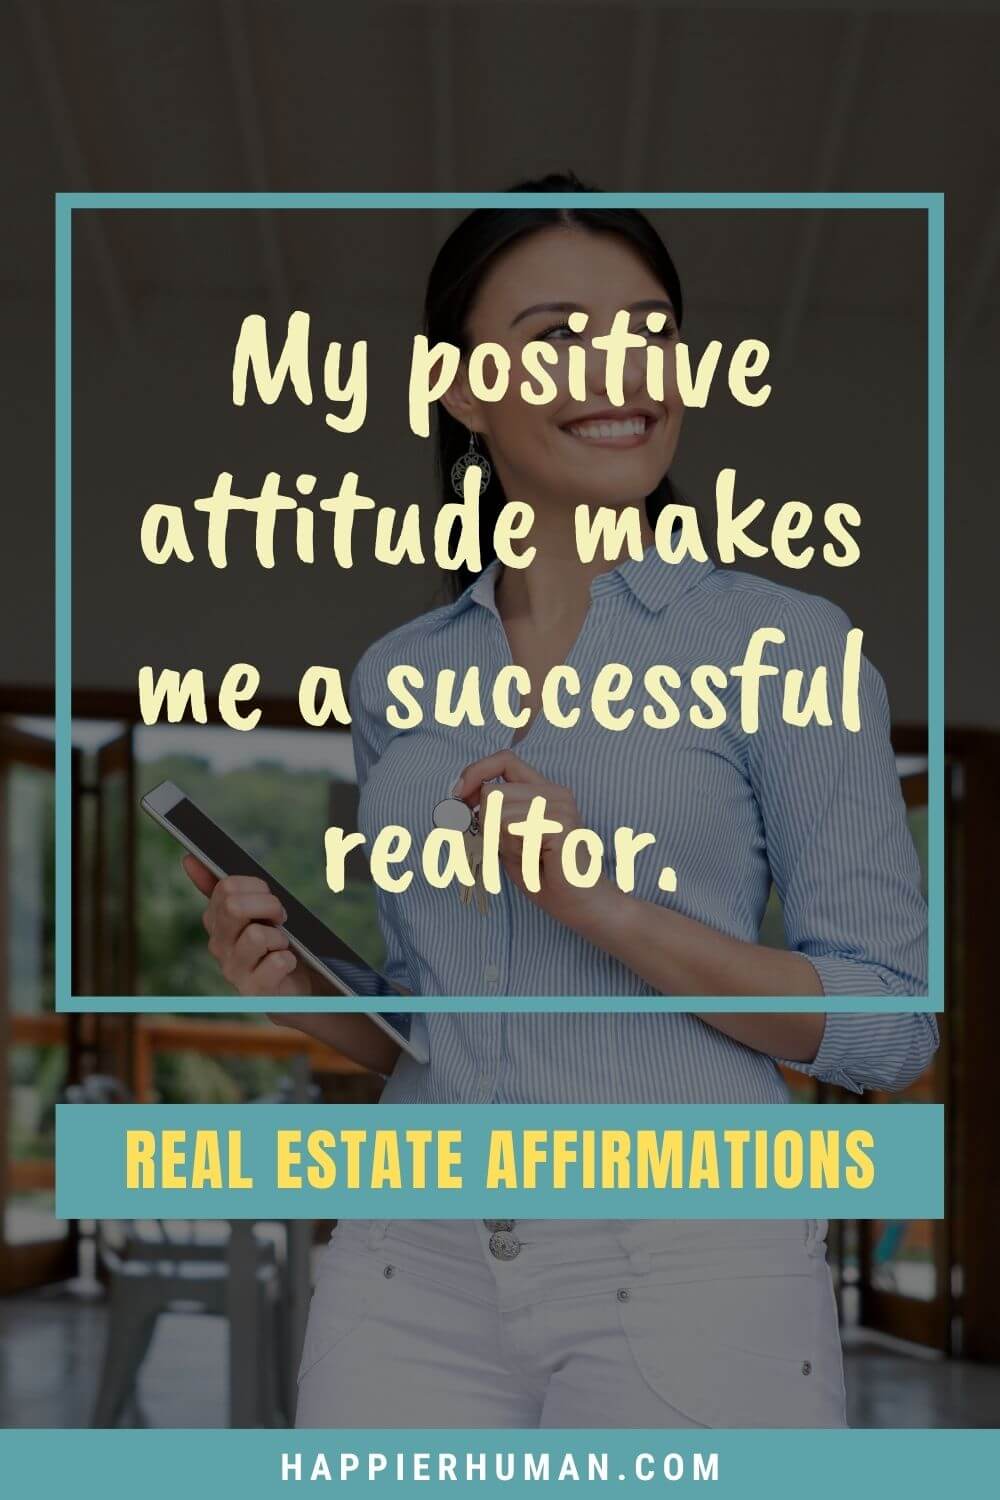 Real Estate Affirmations - My positive attitude makes me a successful realtor. | best real estate affirmations | real estate agent affirmations | affirmations for real estate investors